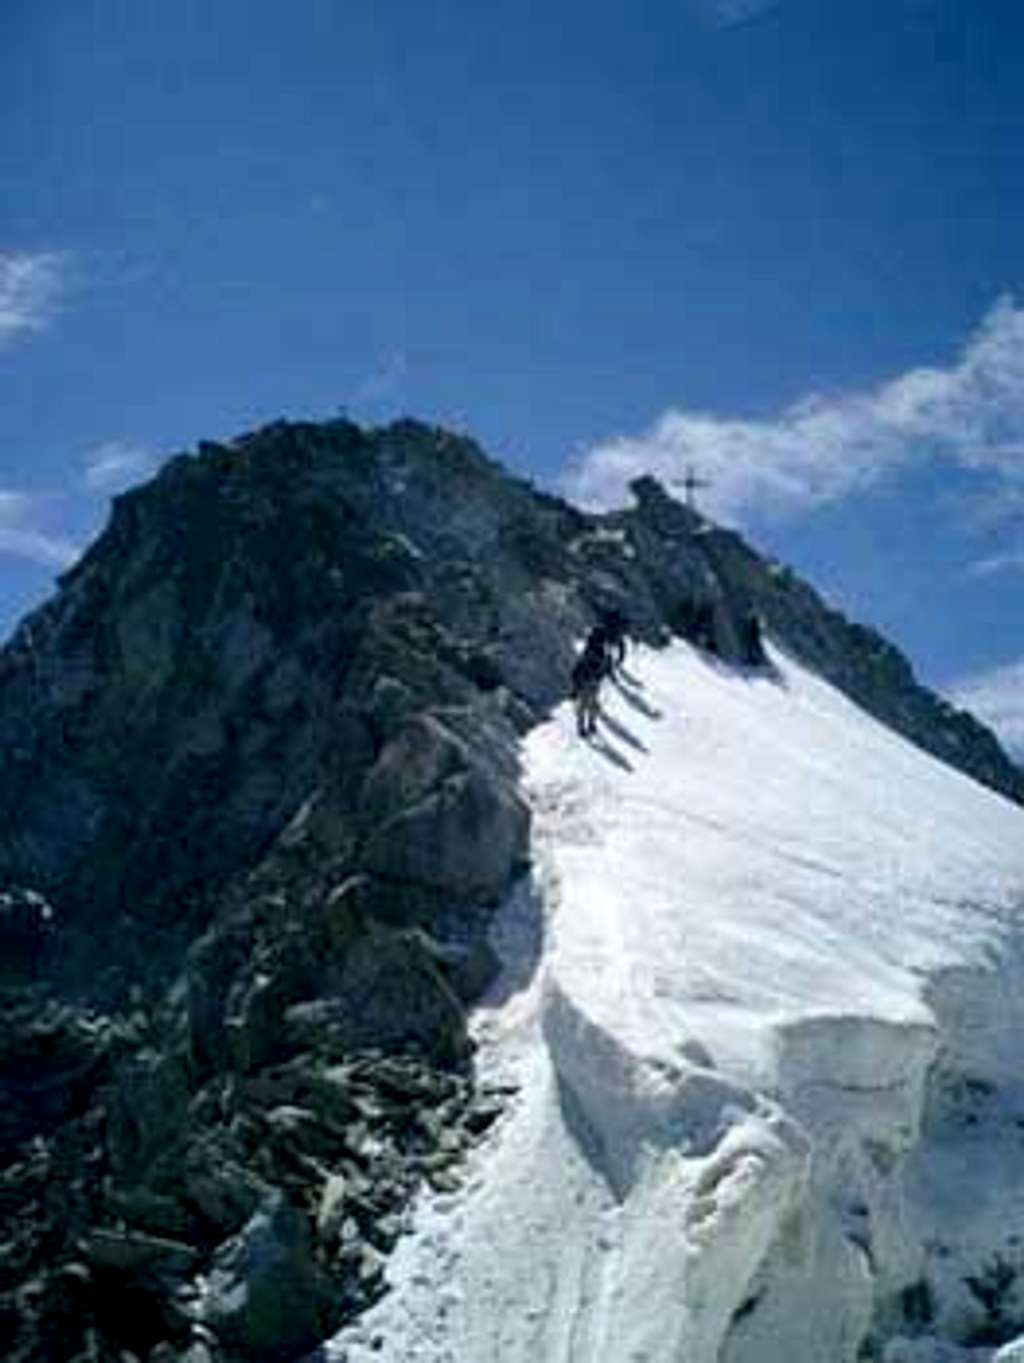 The last part to the summit